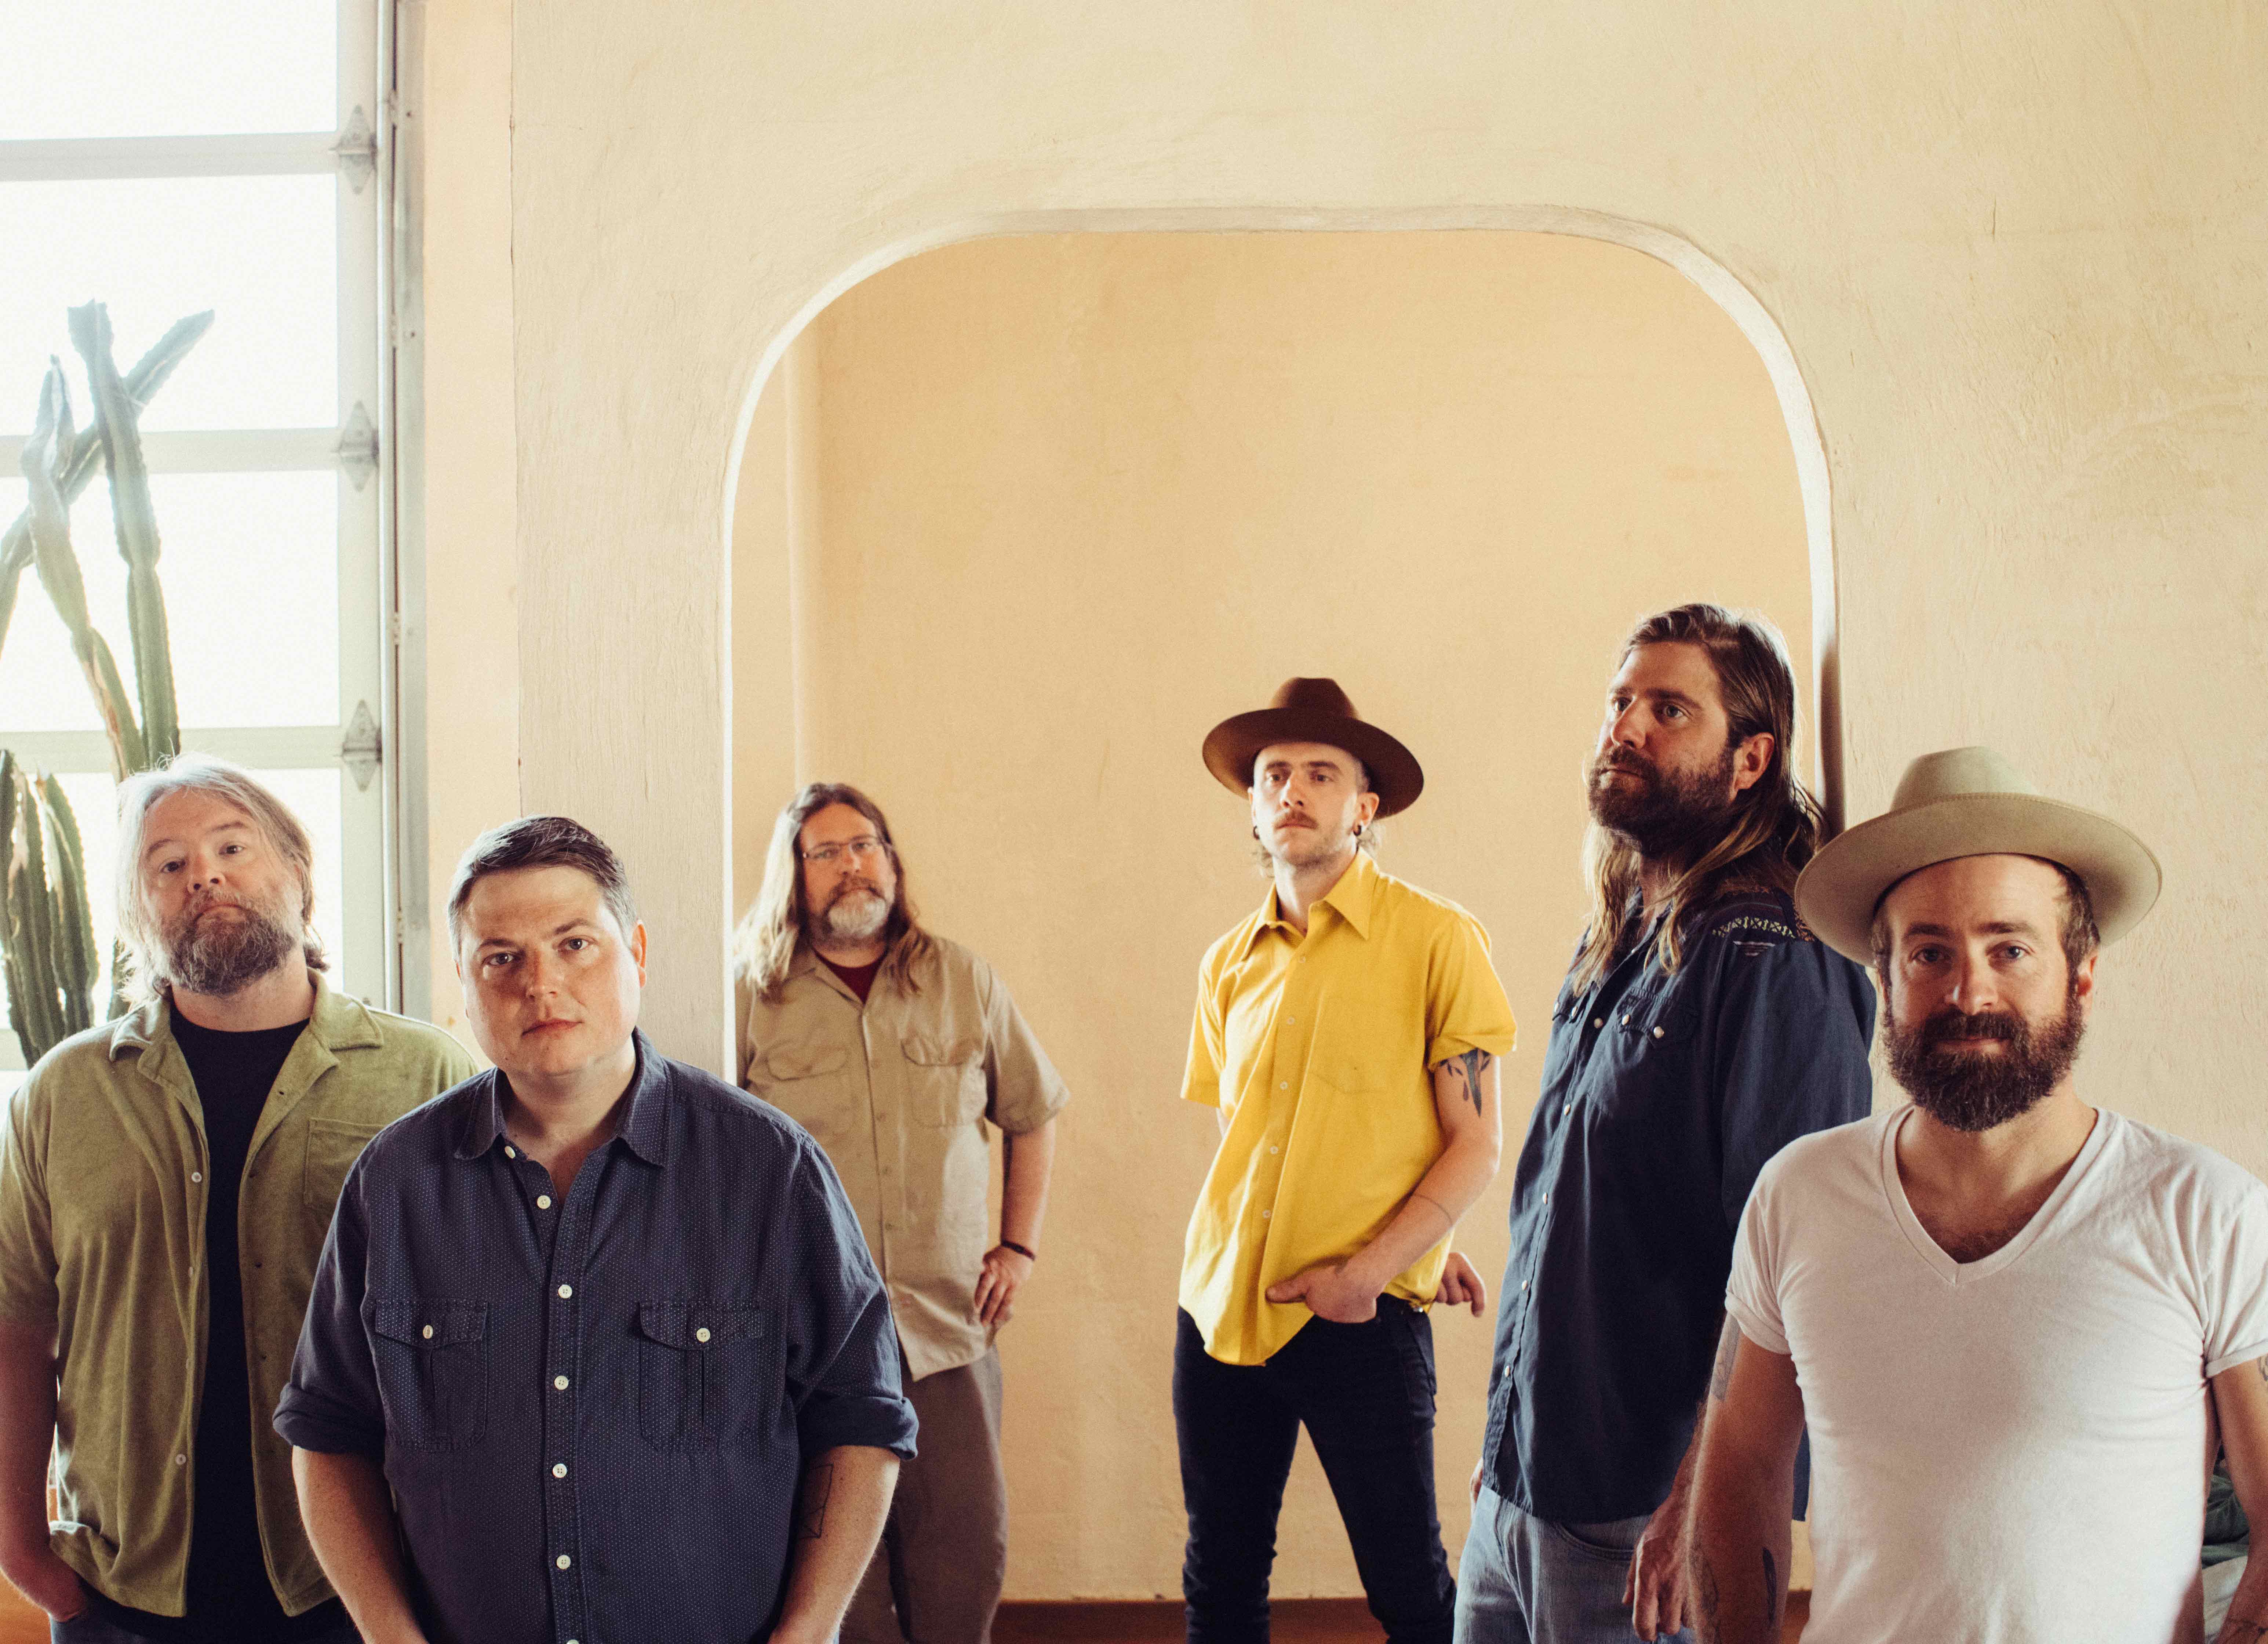 accurate presale password for Trampled By Turtles face value tickets in Huber Heights